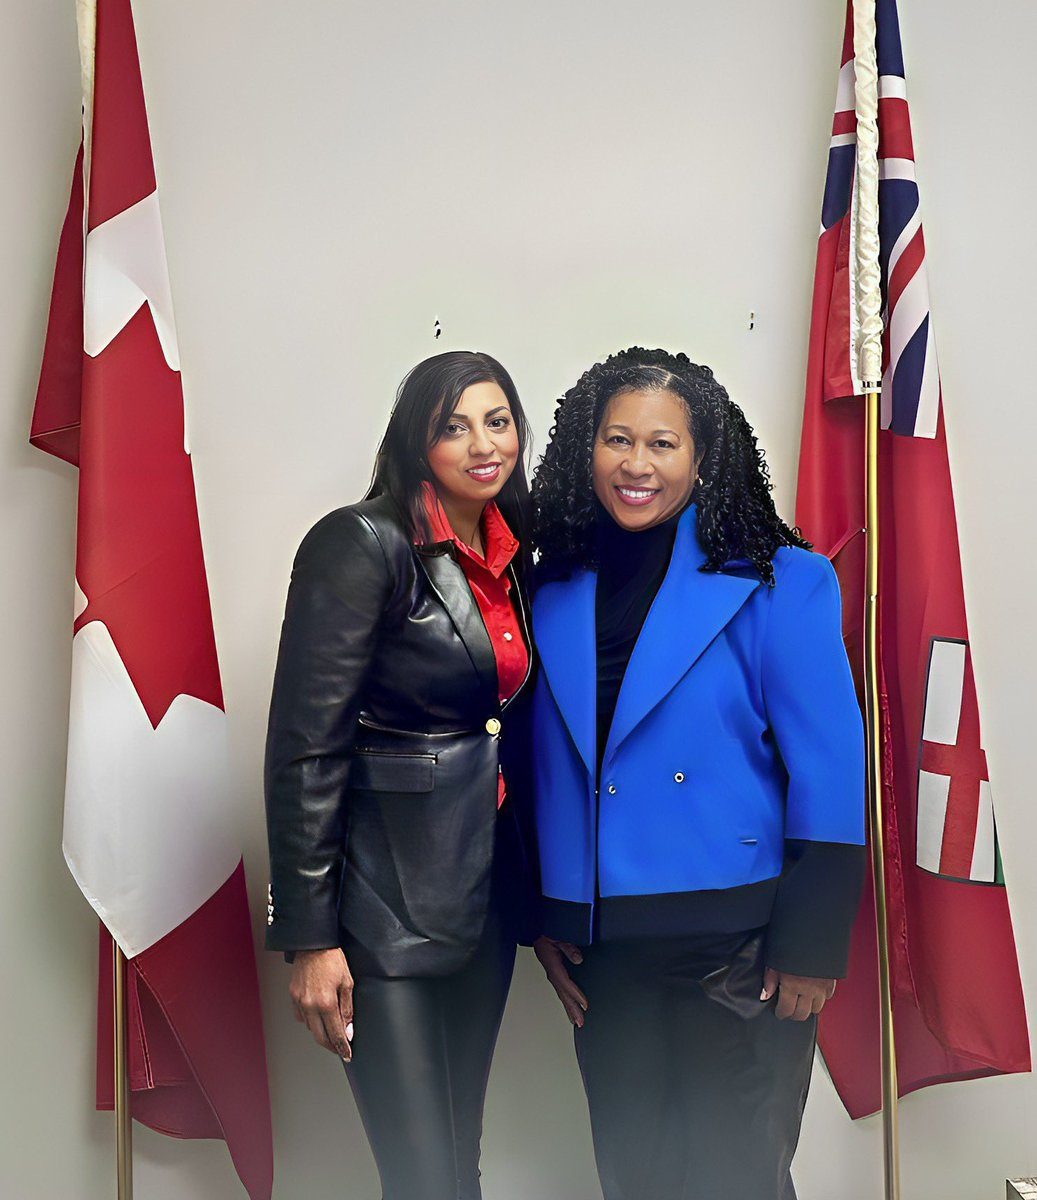 Over the weekend had to pop-by to see my friend, MPP Andrea Hazell in Scarborough—Guildwood.

It was great 😊 to see so many volunteers and stakeholders at the open house. 

#scarborough #scarboroughtoronto #openhouse #mppandreahazell #kingstonroad